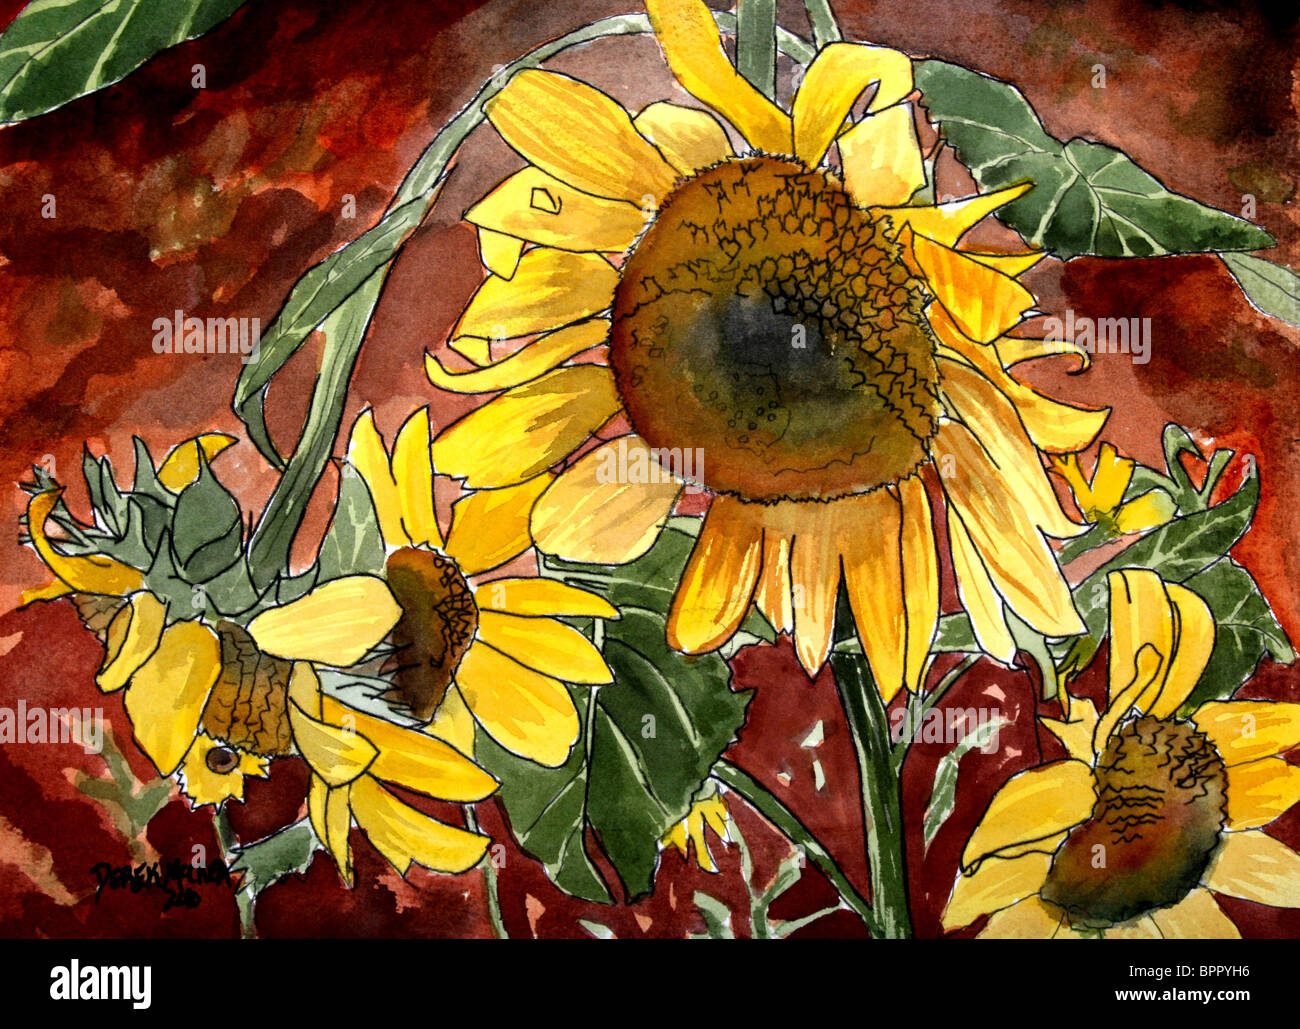 Sunflowers Watercolor Painting Country Folk Art Stock Photo - Alamy